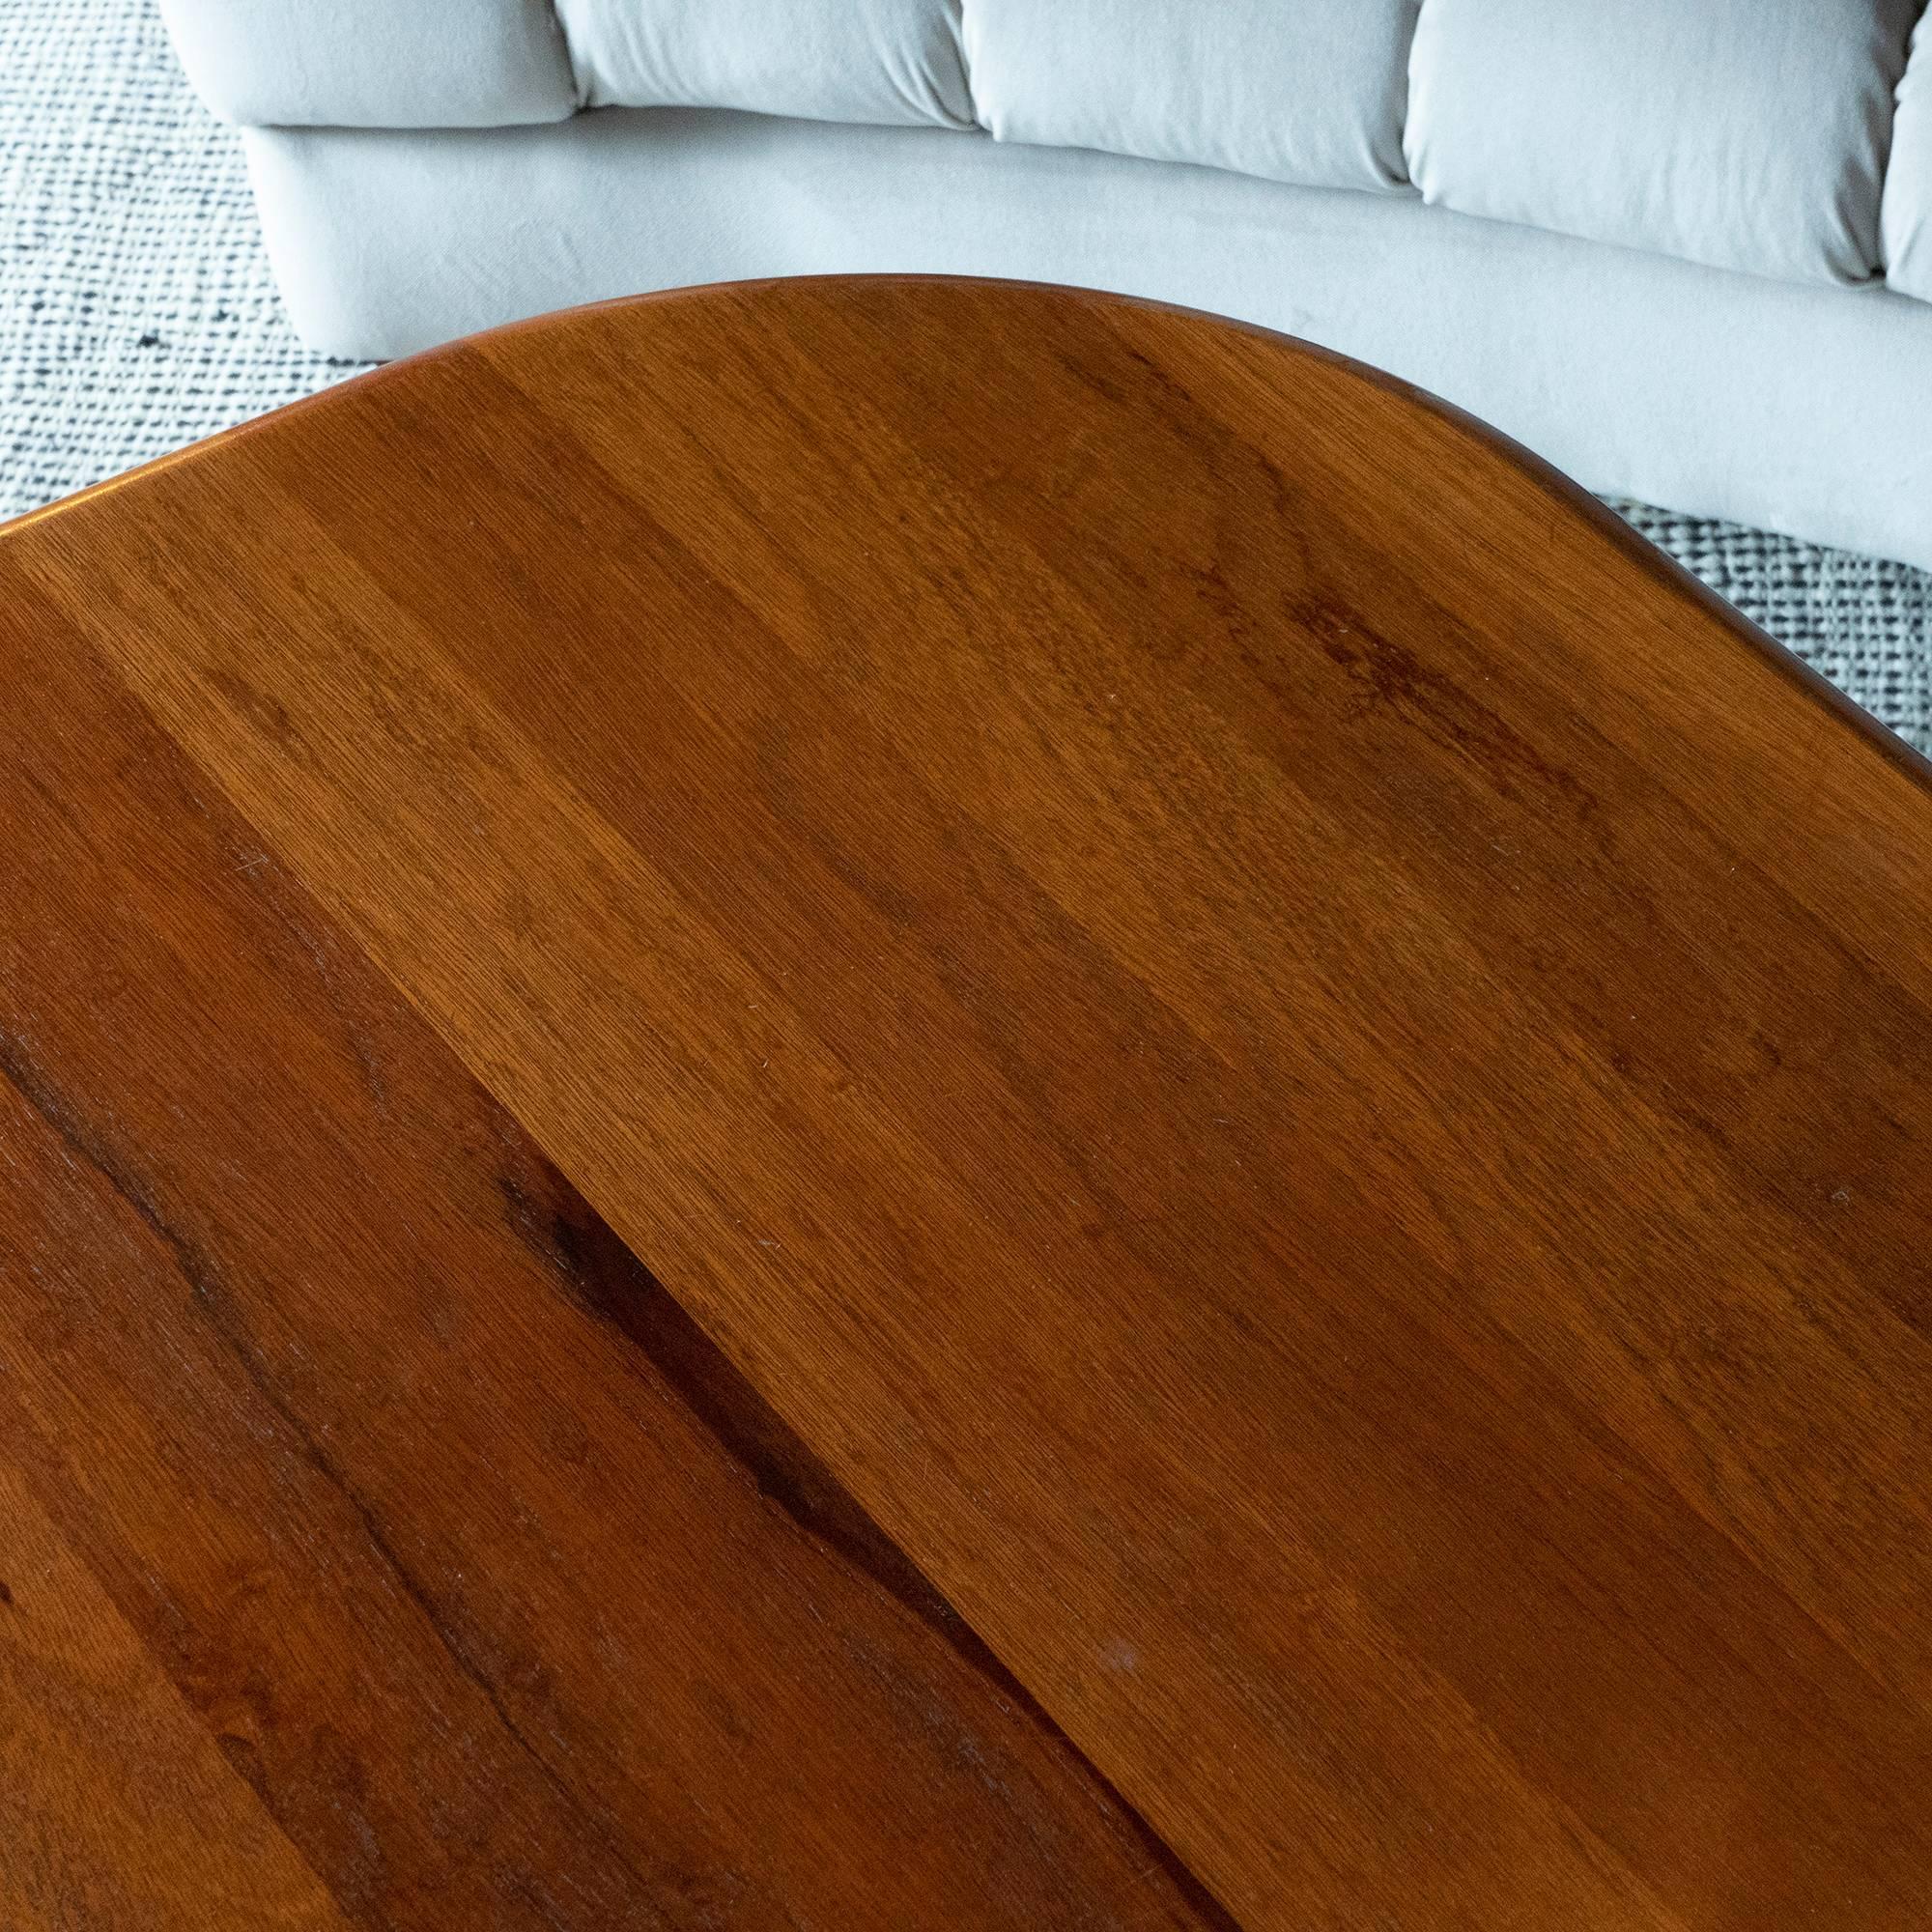 Triangular shape teak coffee table with three tapered legs with perfect vintage patina, few scratches on the top, by Severin Hansen, Denmark, circa 1950.